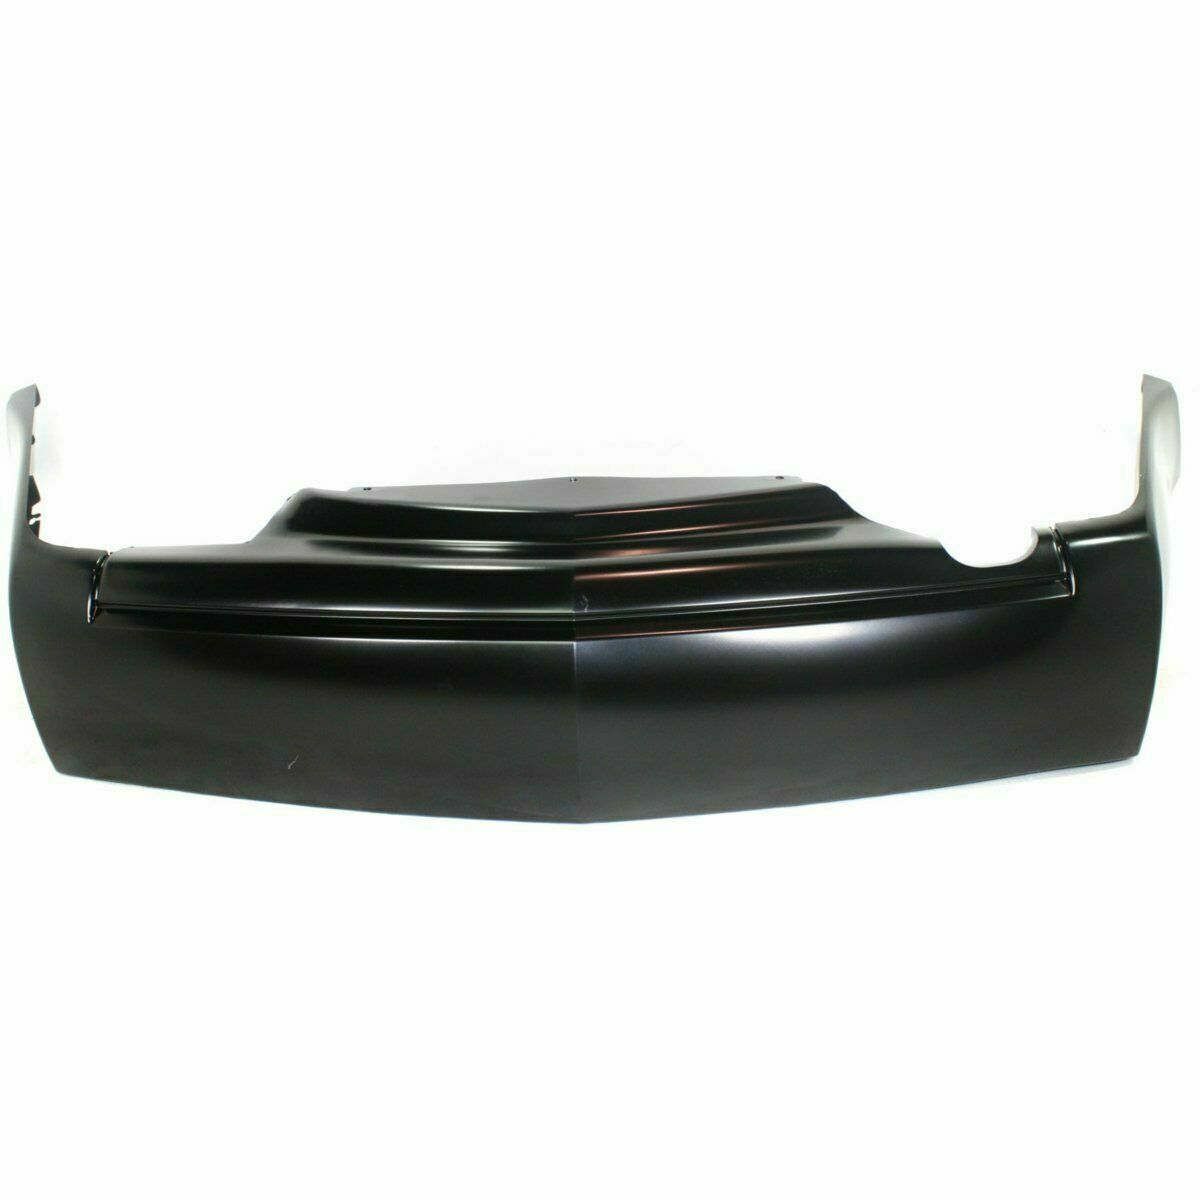 2003-2007 Cadillac CTS 2.8/3.2 Rear Bumper Painted to Match